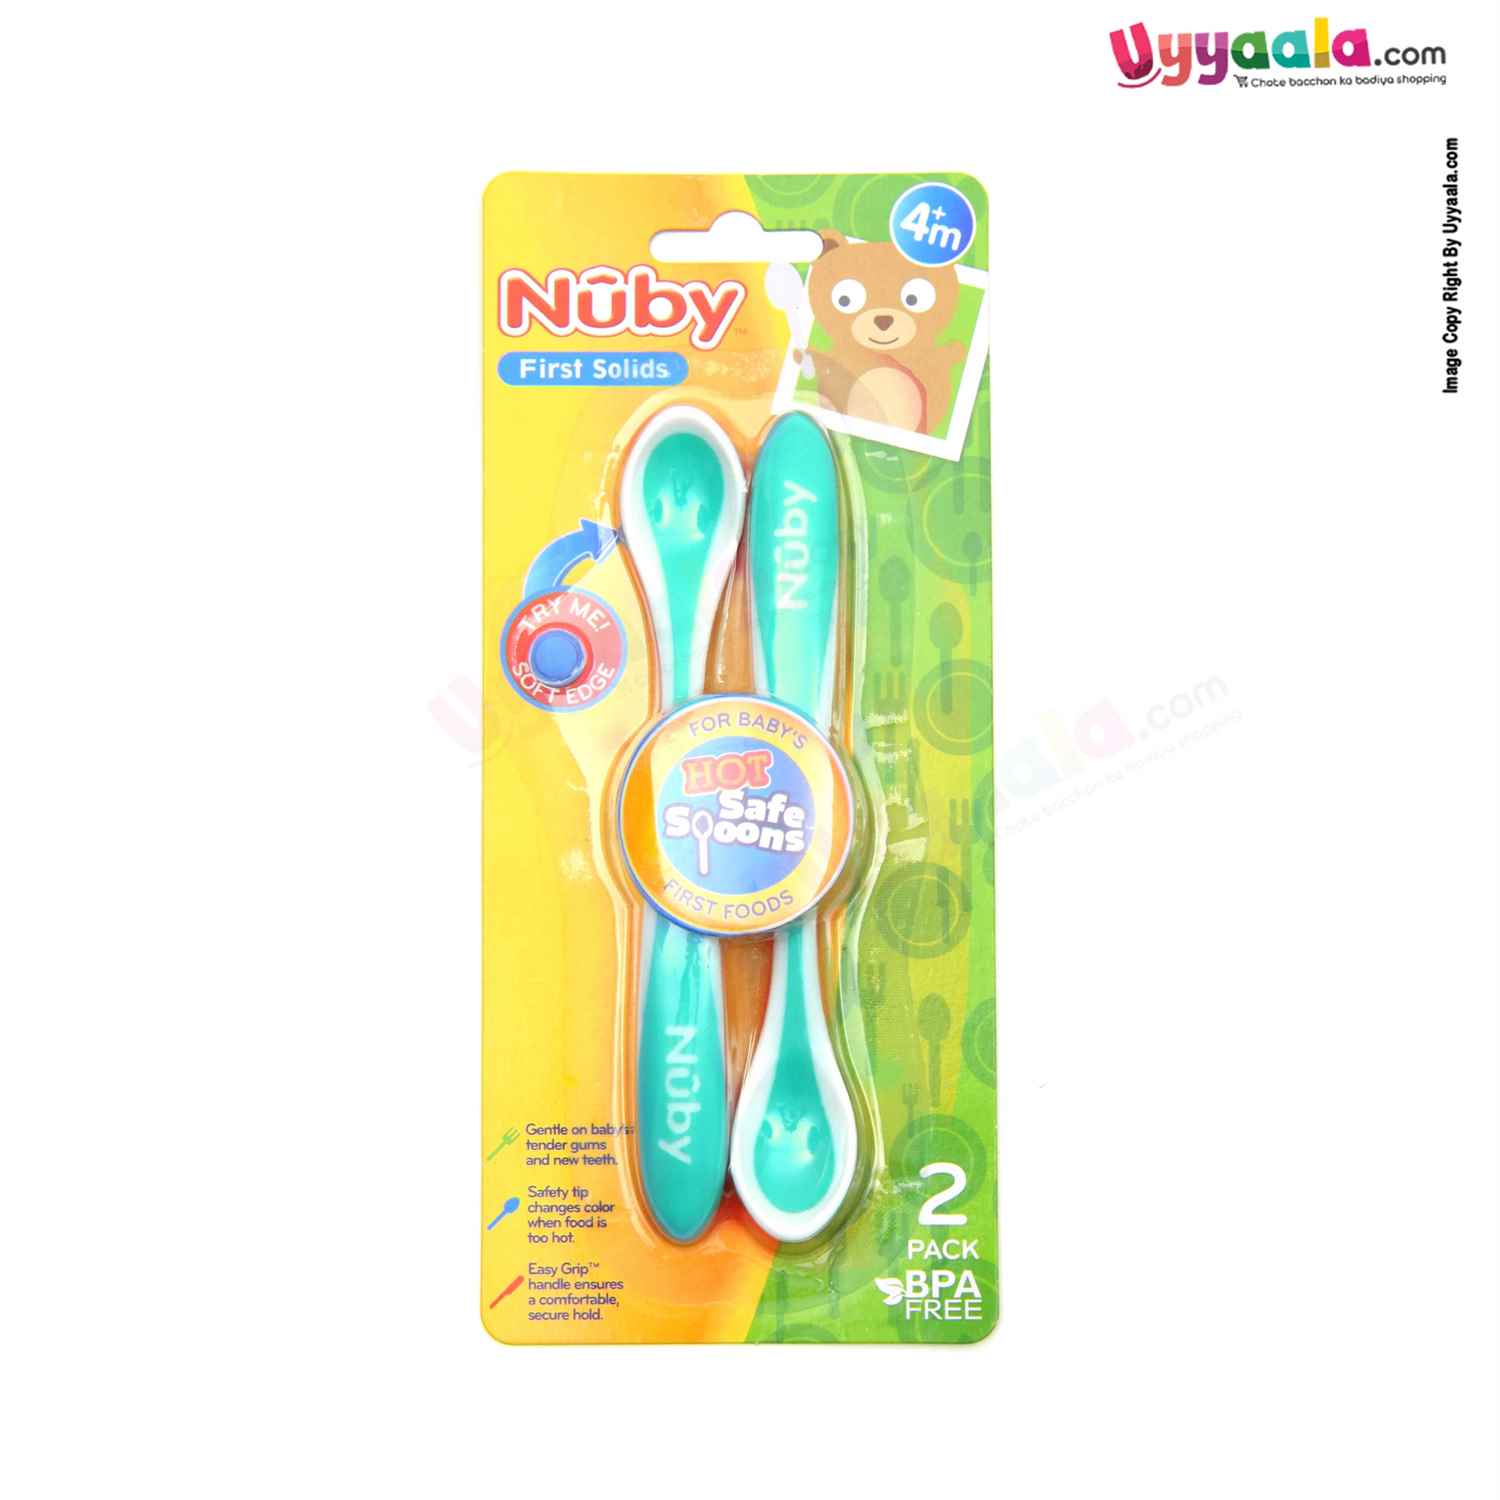 NUBY Hot safe spoons for babies first foods, Pack of 2 - Green, 4+m